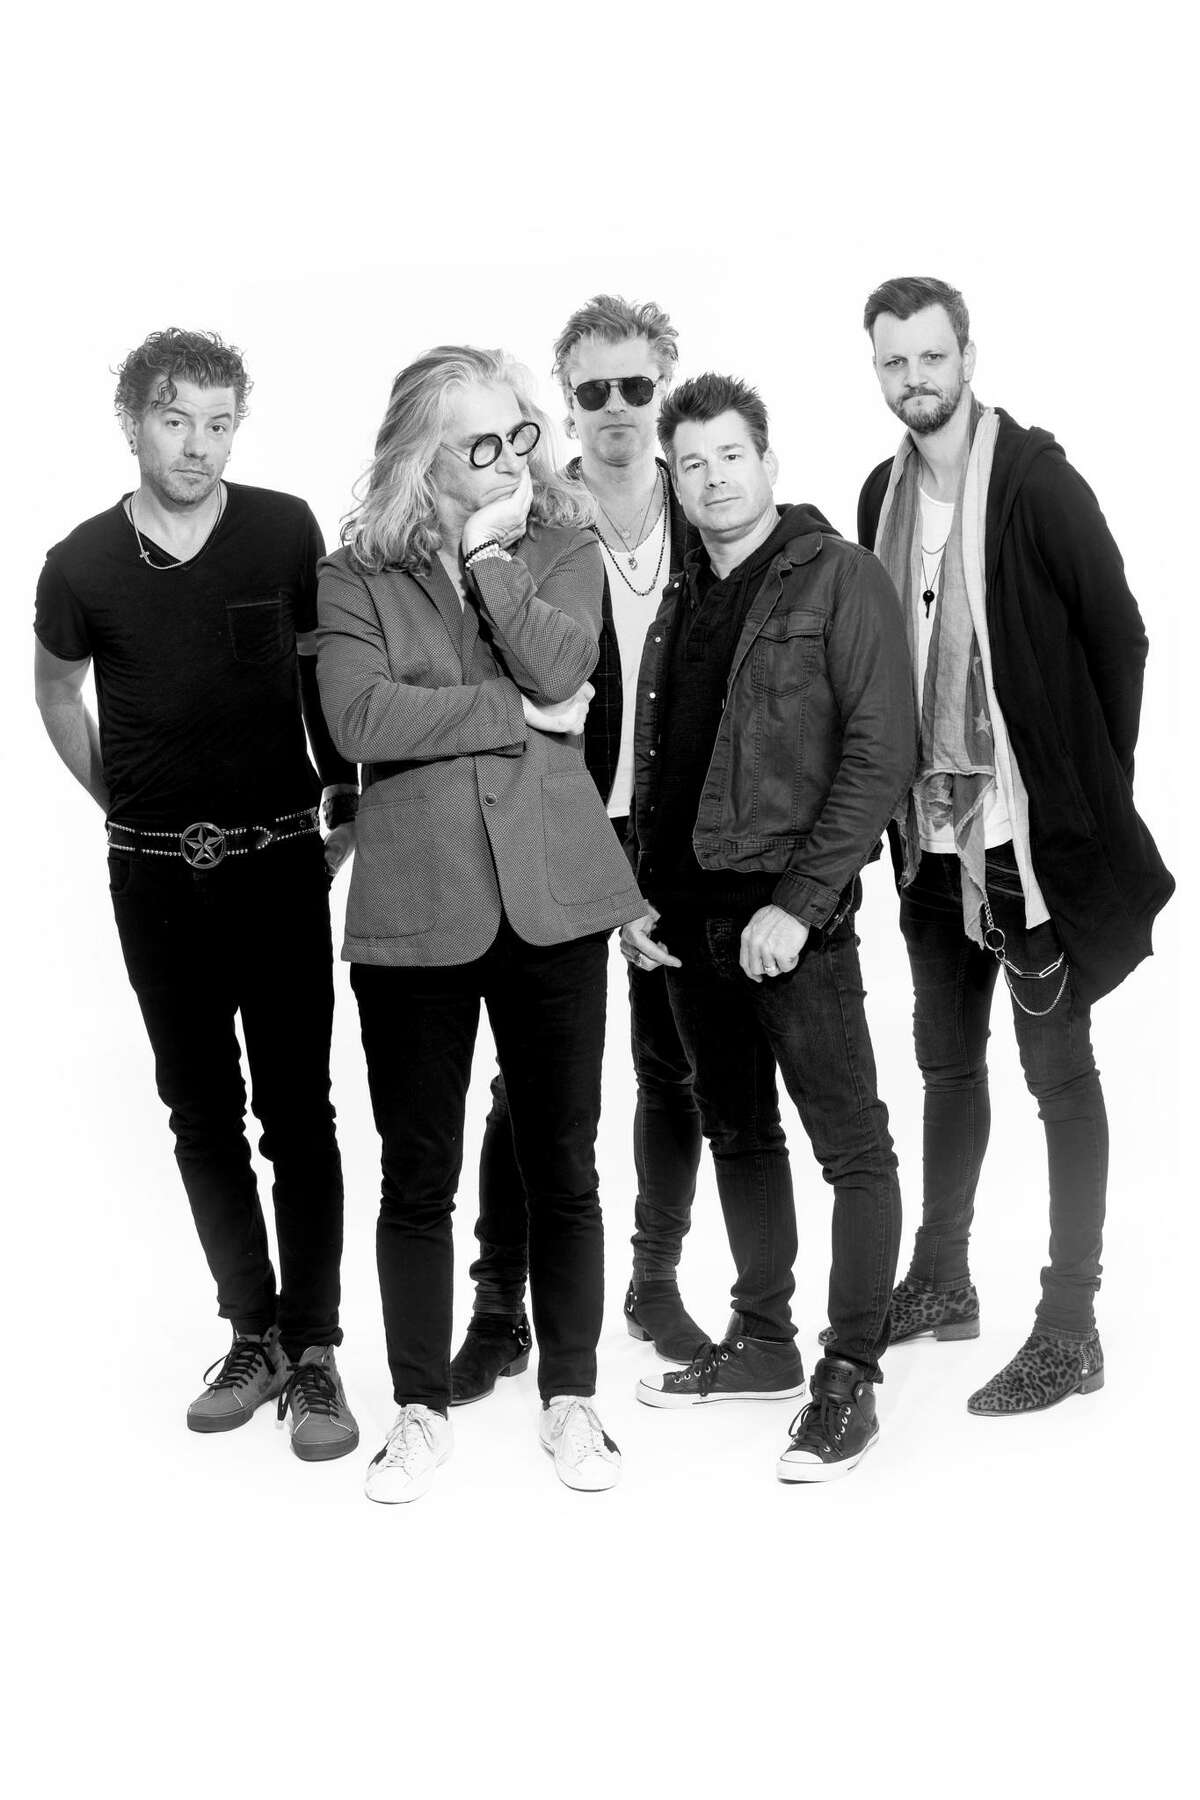 Collective Soul’s25th Anniversary Tour is stopping at the RidgefieldPlayhouse on Tuesday, Oct. 1.